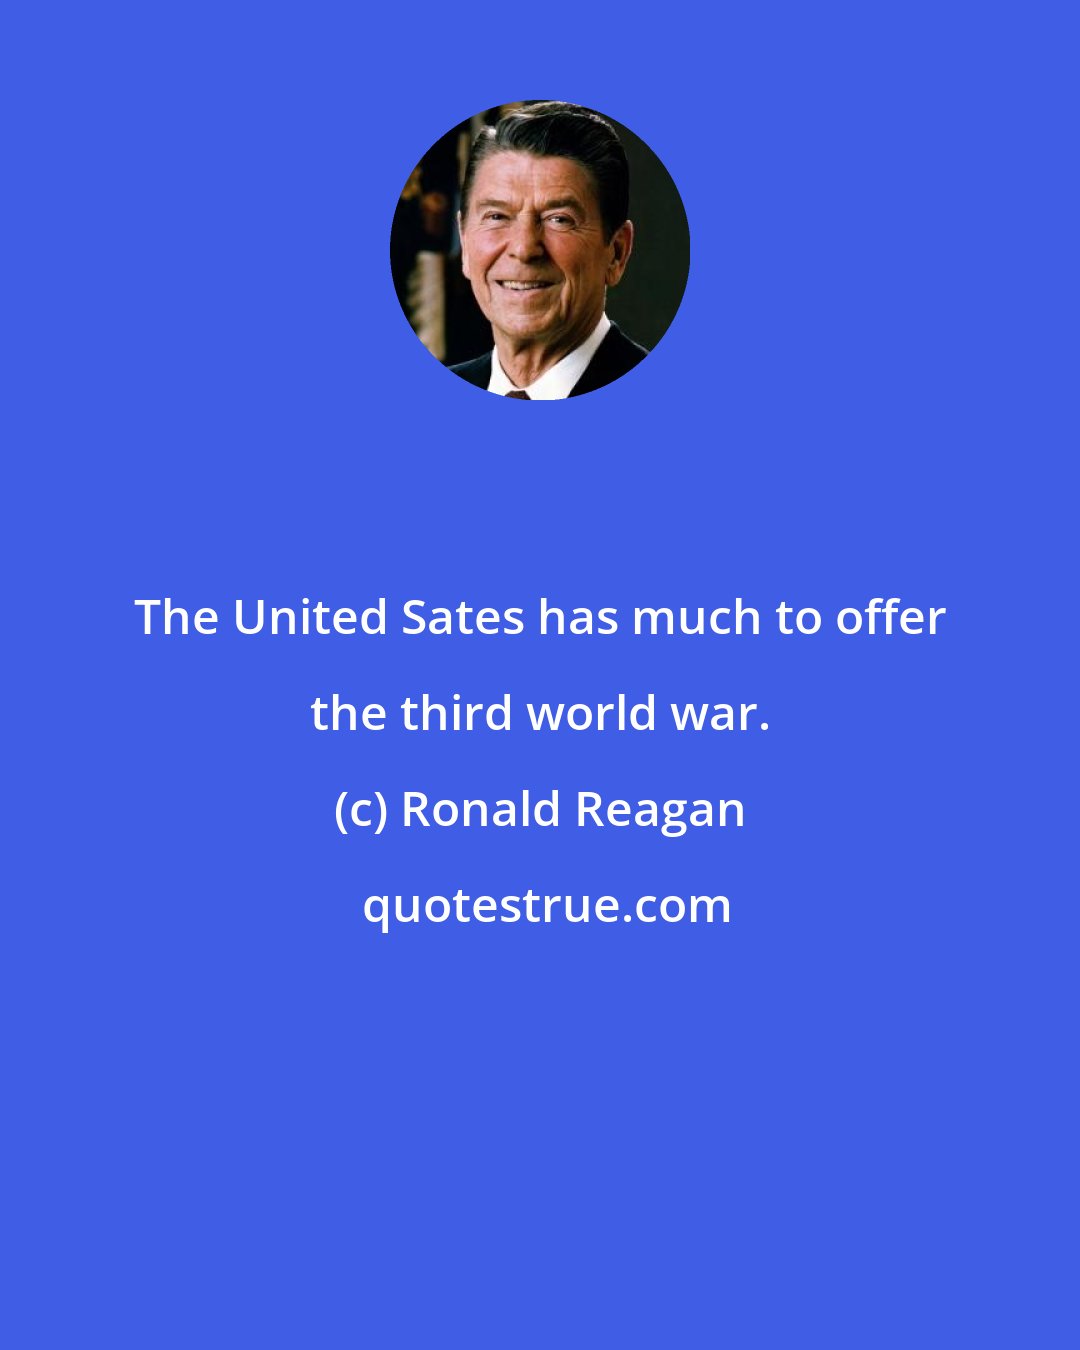 Ronald Reagan: The United Sates has much to offer the third world war.